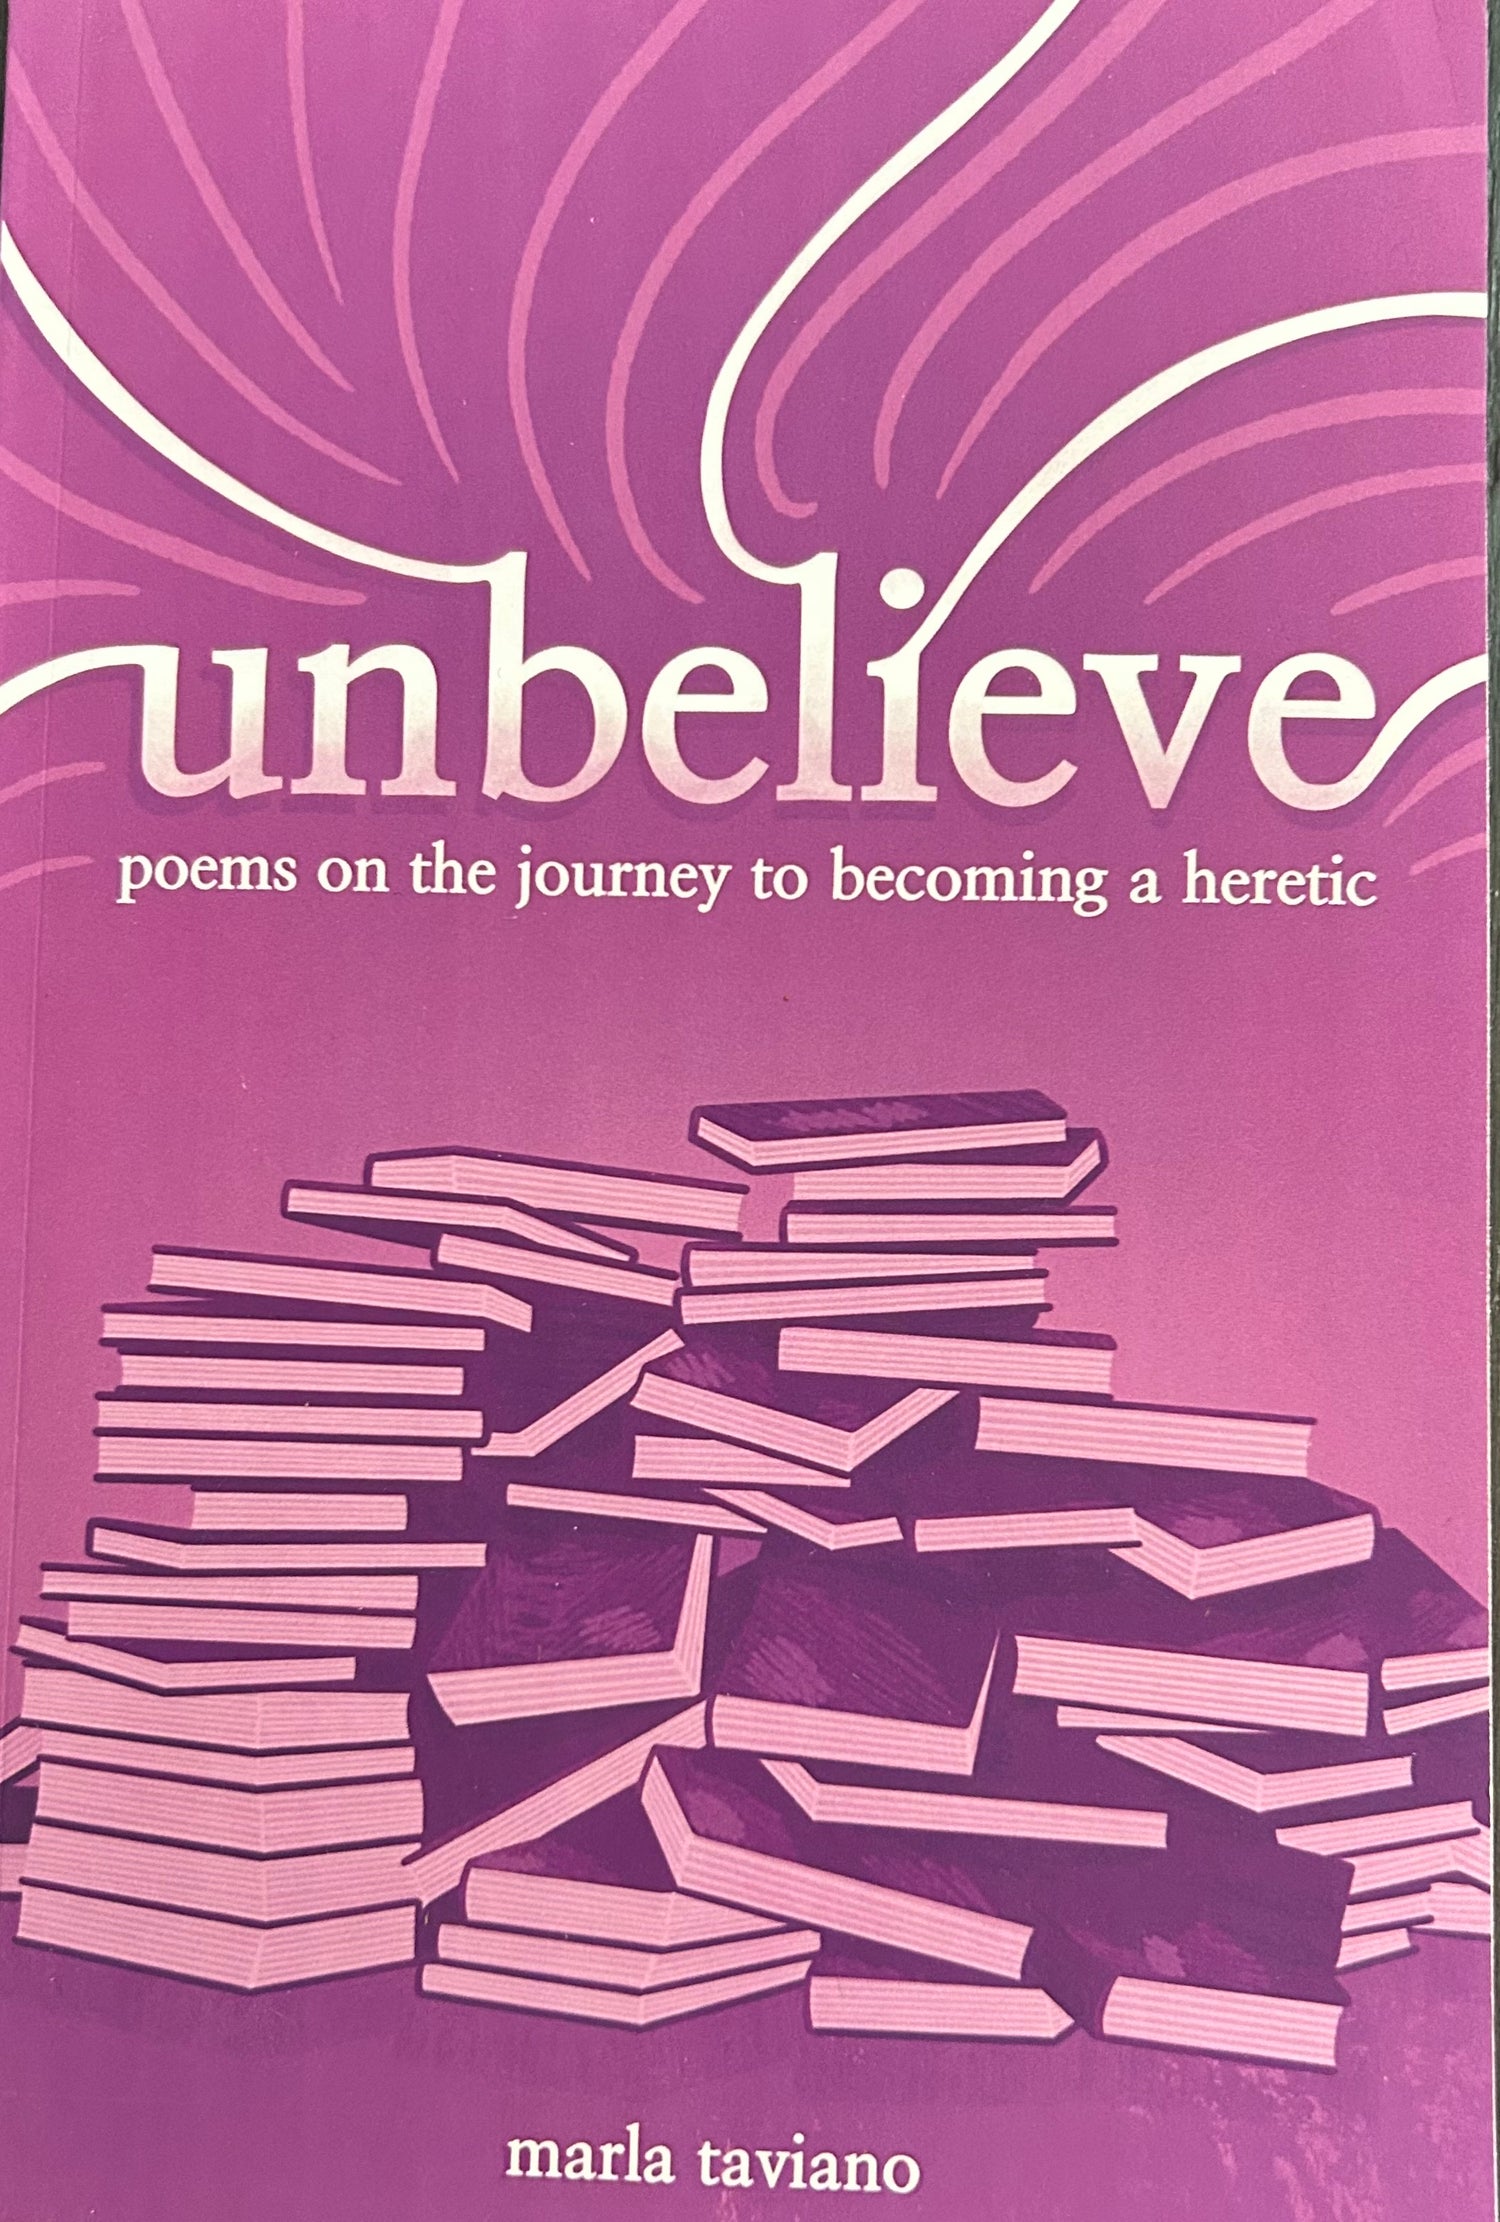 Unbelieve: Poems on the Journey to Becoming a Heretic (Signed Copy)